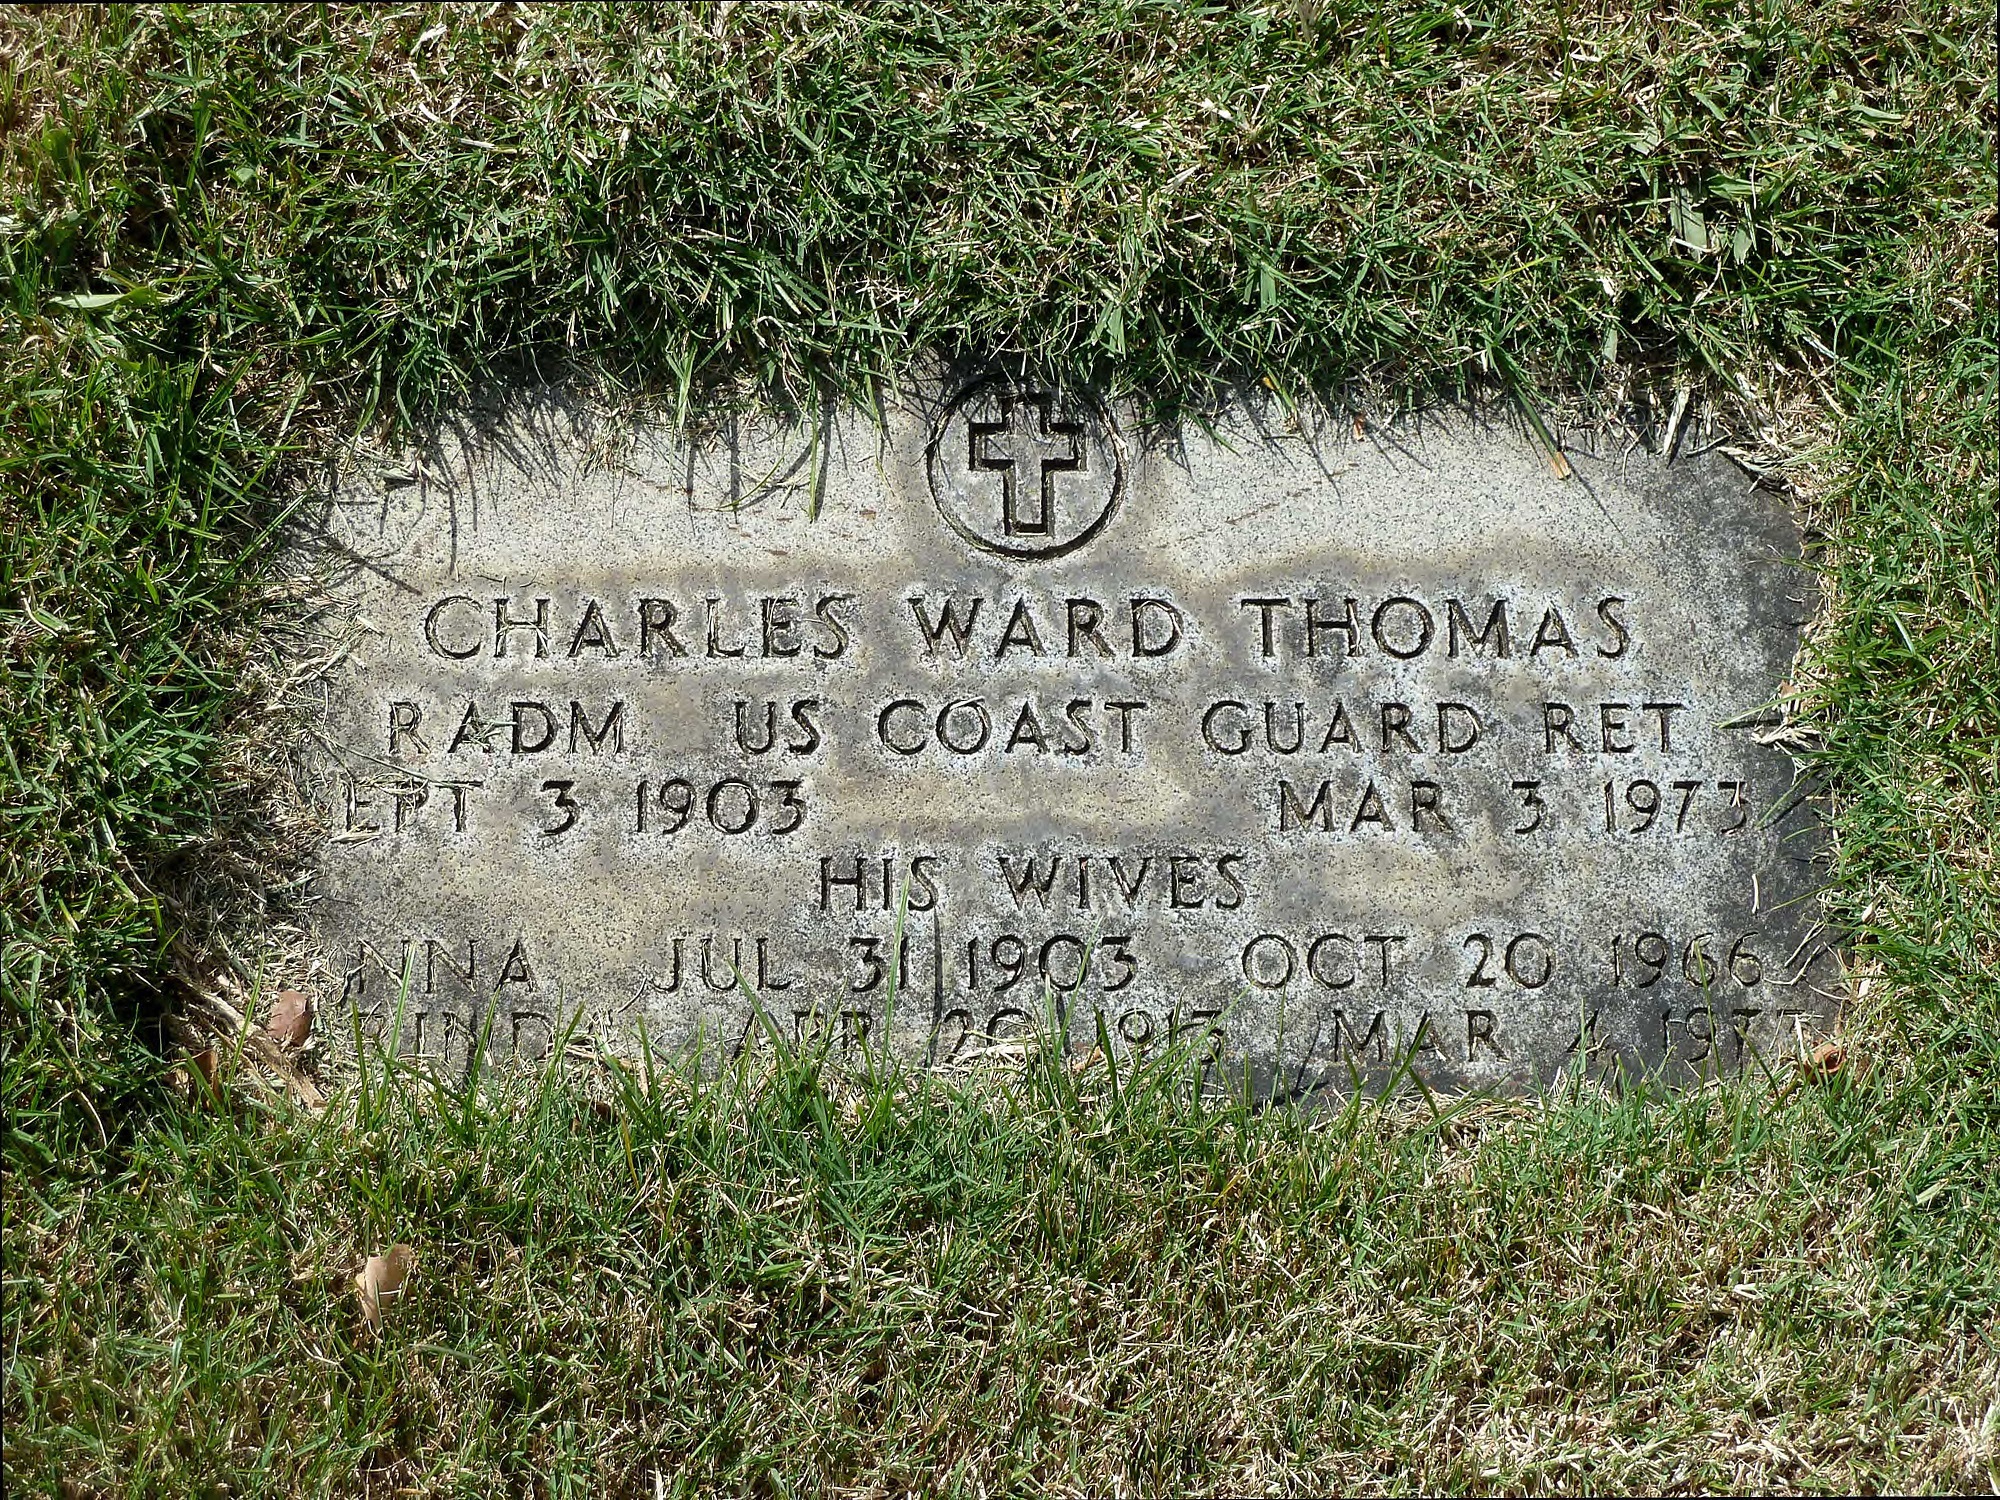 Grave marker for Rear Adm. Thomas at Hawaii’s National Memorial Cemetery of the Pacific located in Honolulu. (Find-a-Grave)